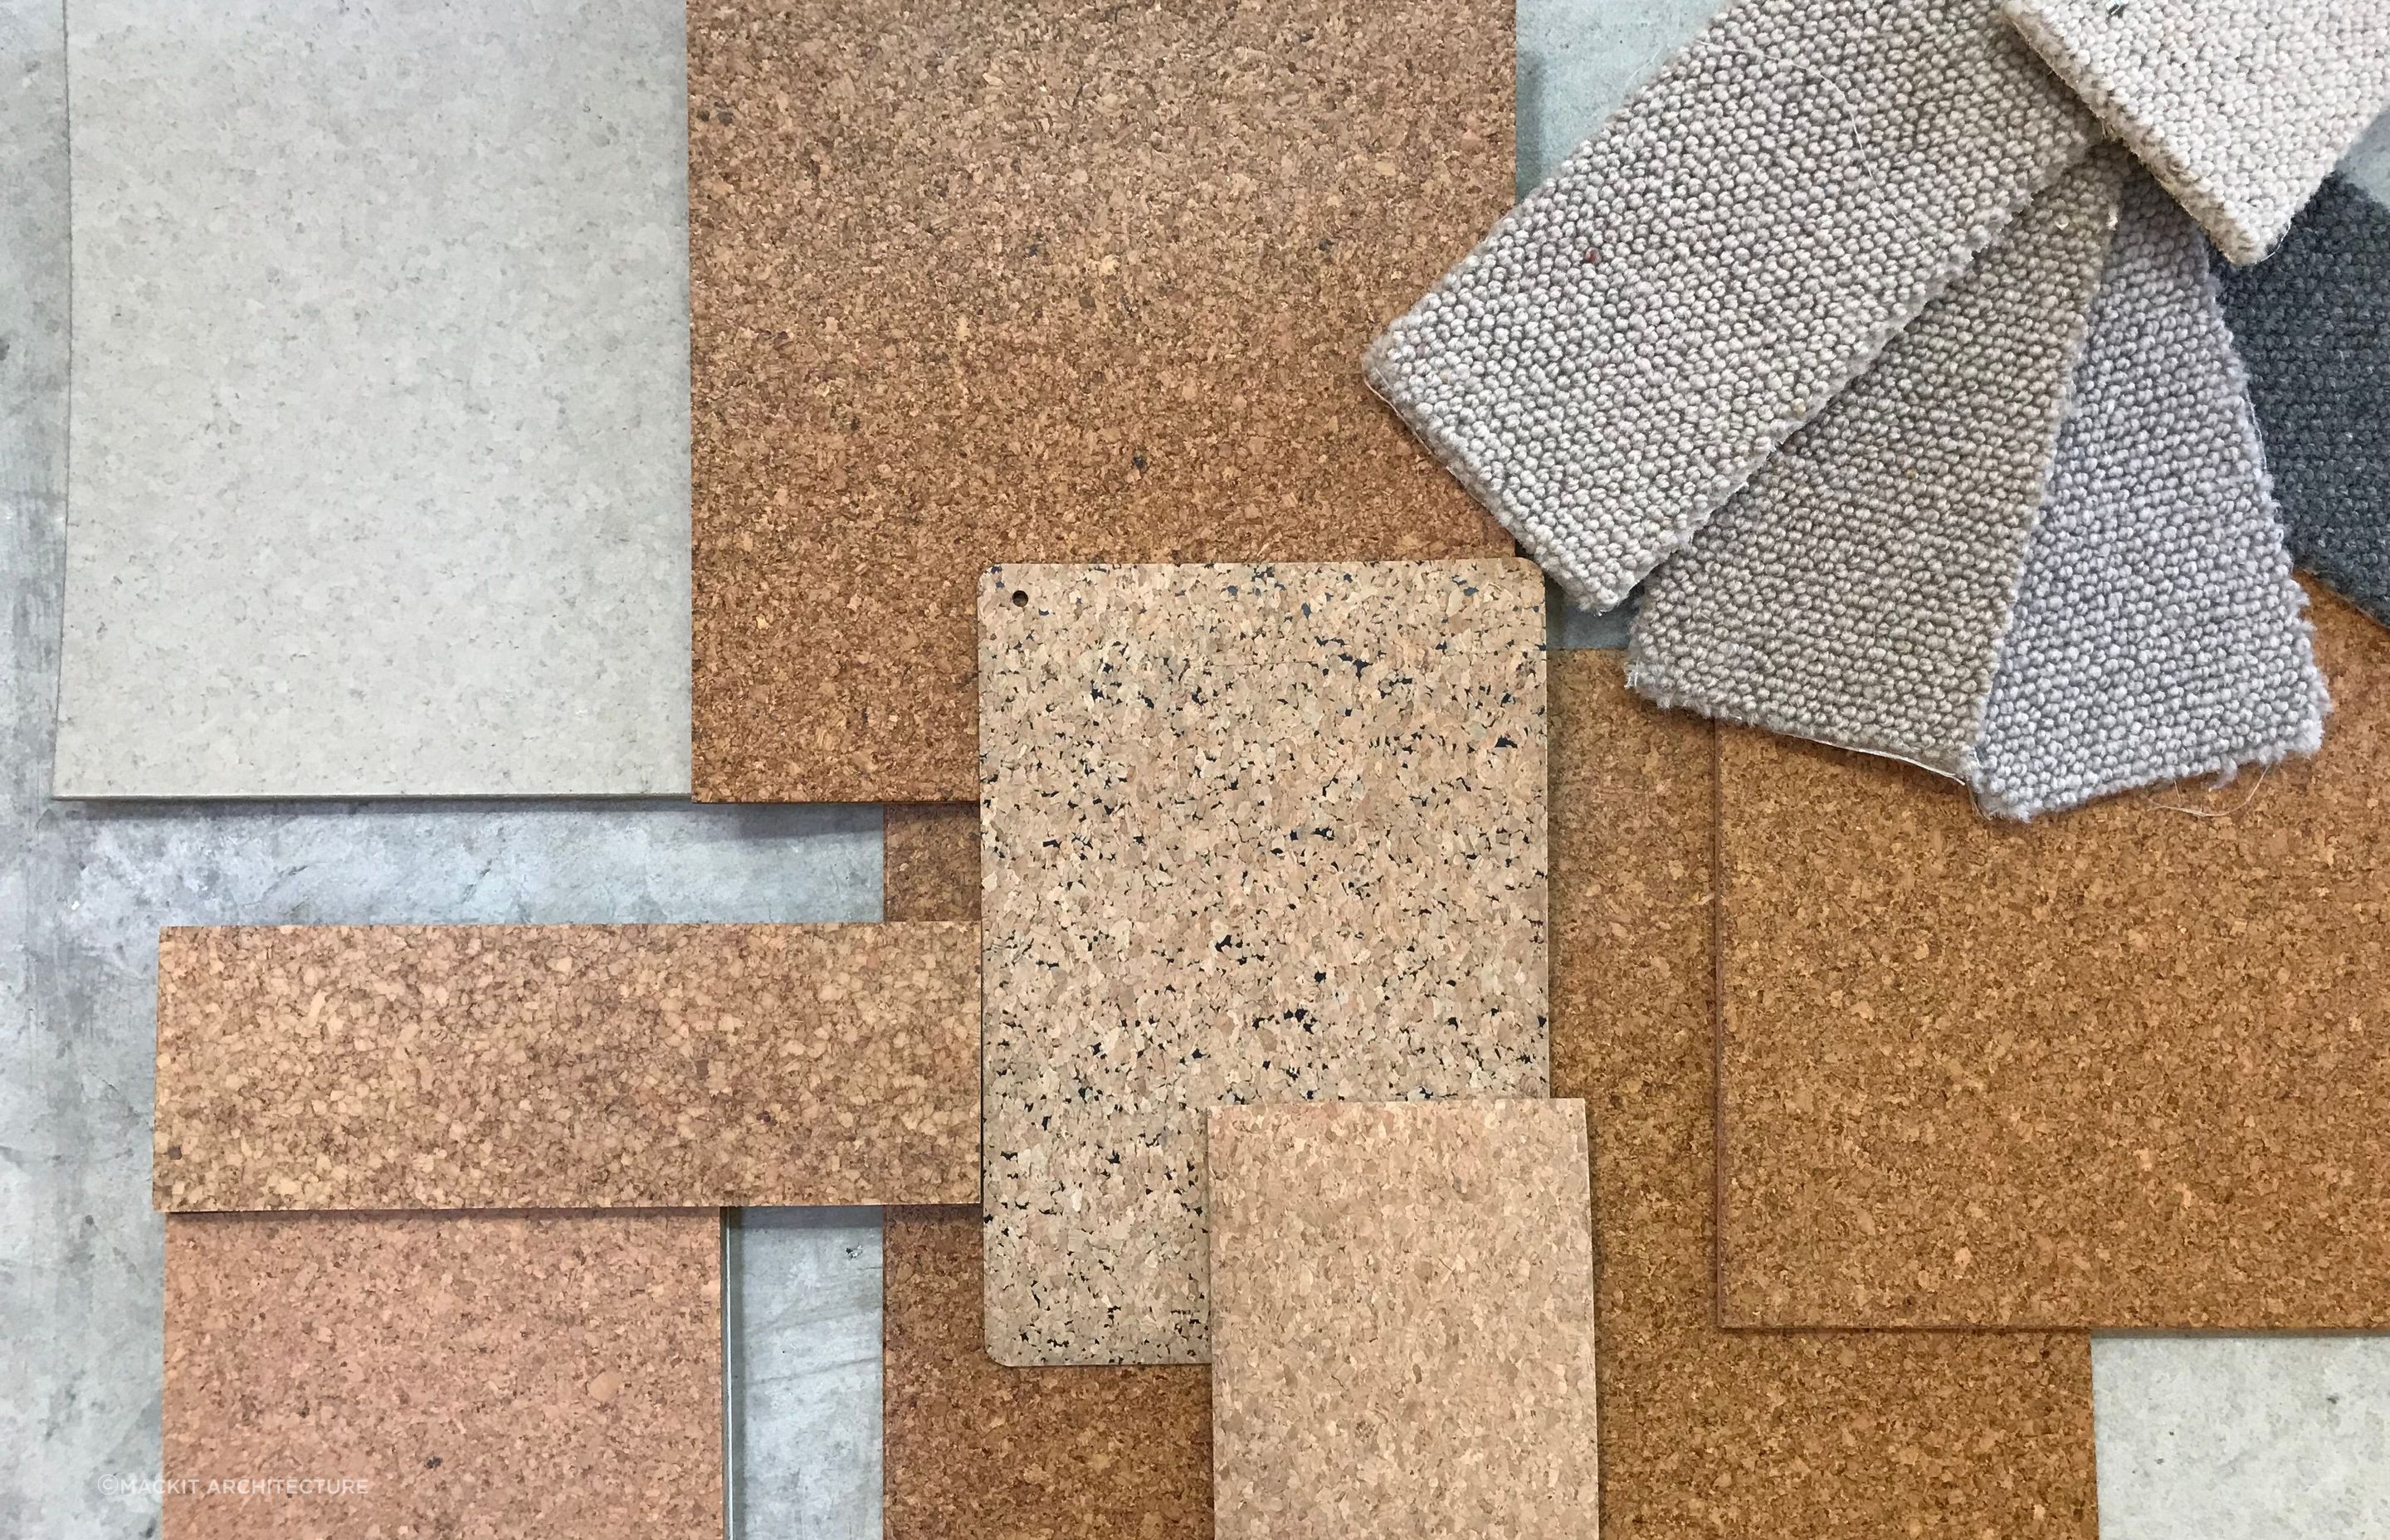 Cork is experiencing a revival, not only as a floor covering, but as a wall covering too. Hayley selected a cork wall covering by Dekwall in her materials board.